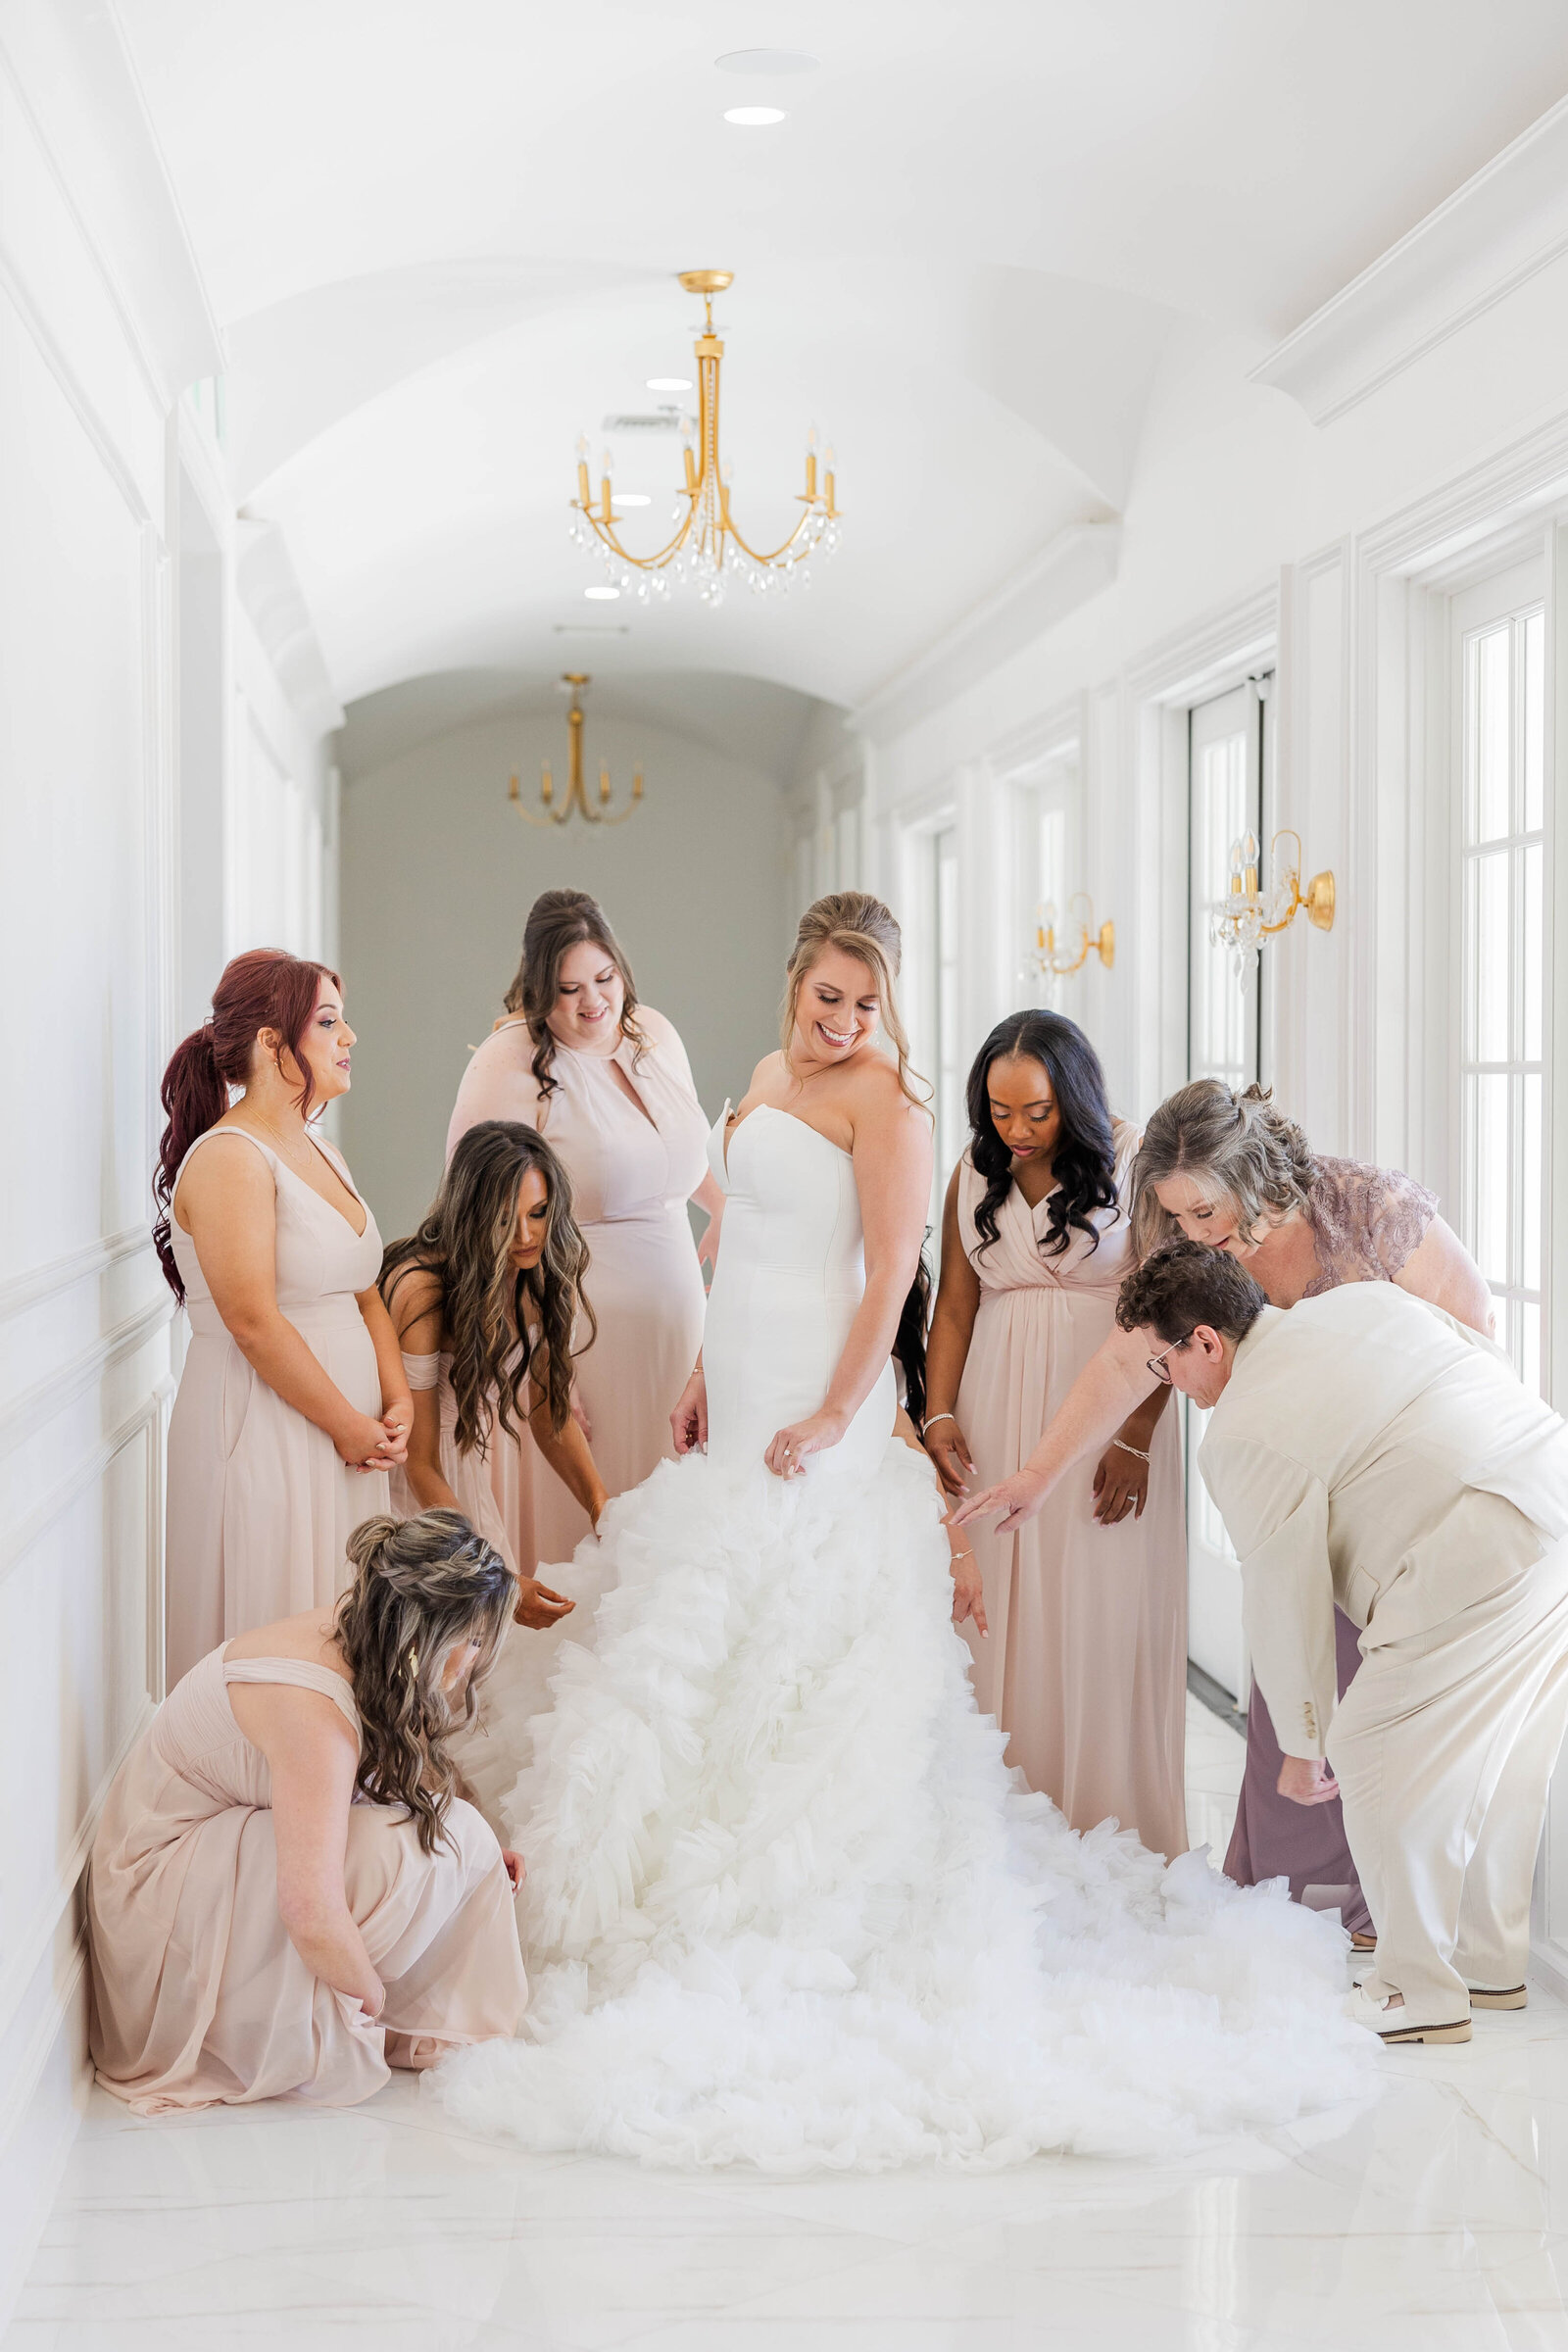 bride-with-her-bridesmaids-fluffing-her-dress-in-white-hallway